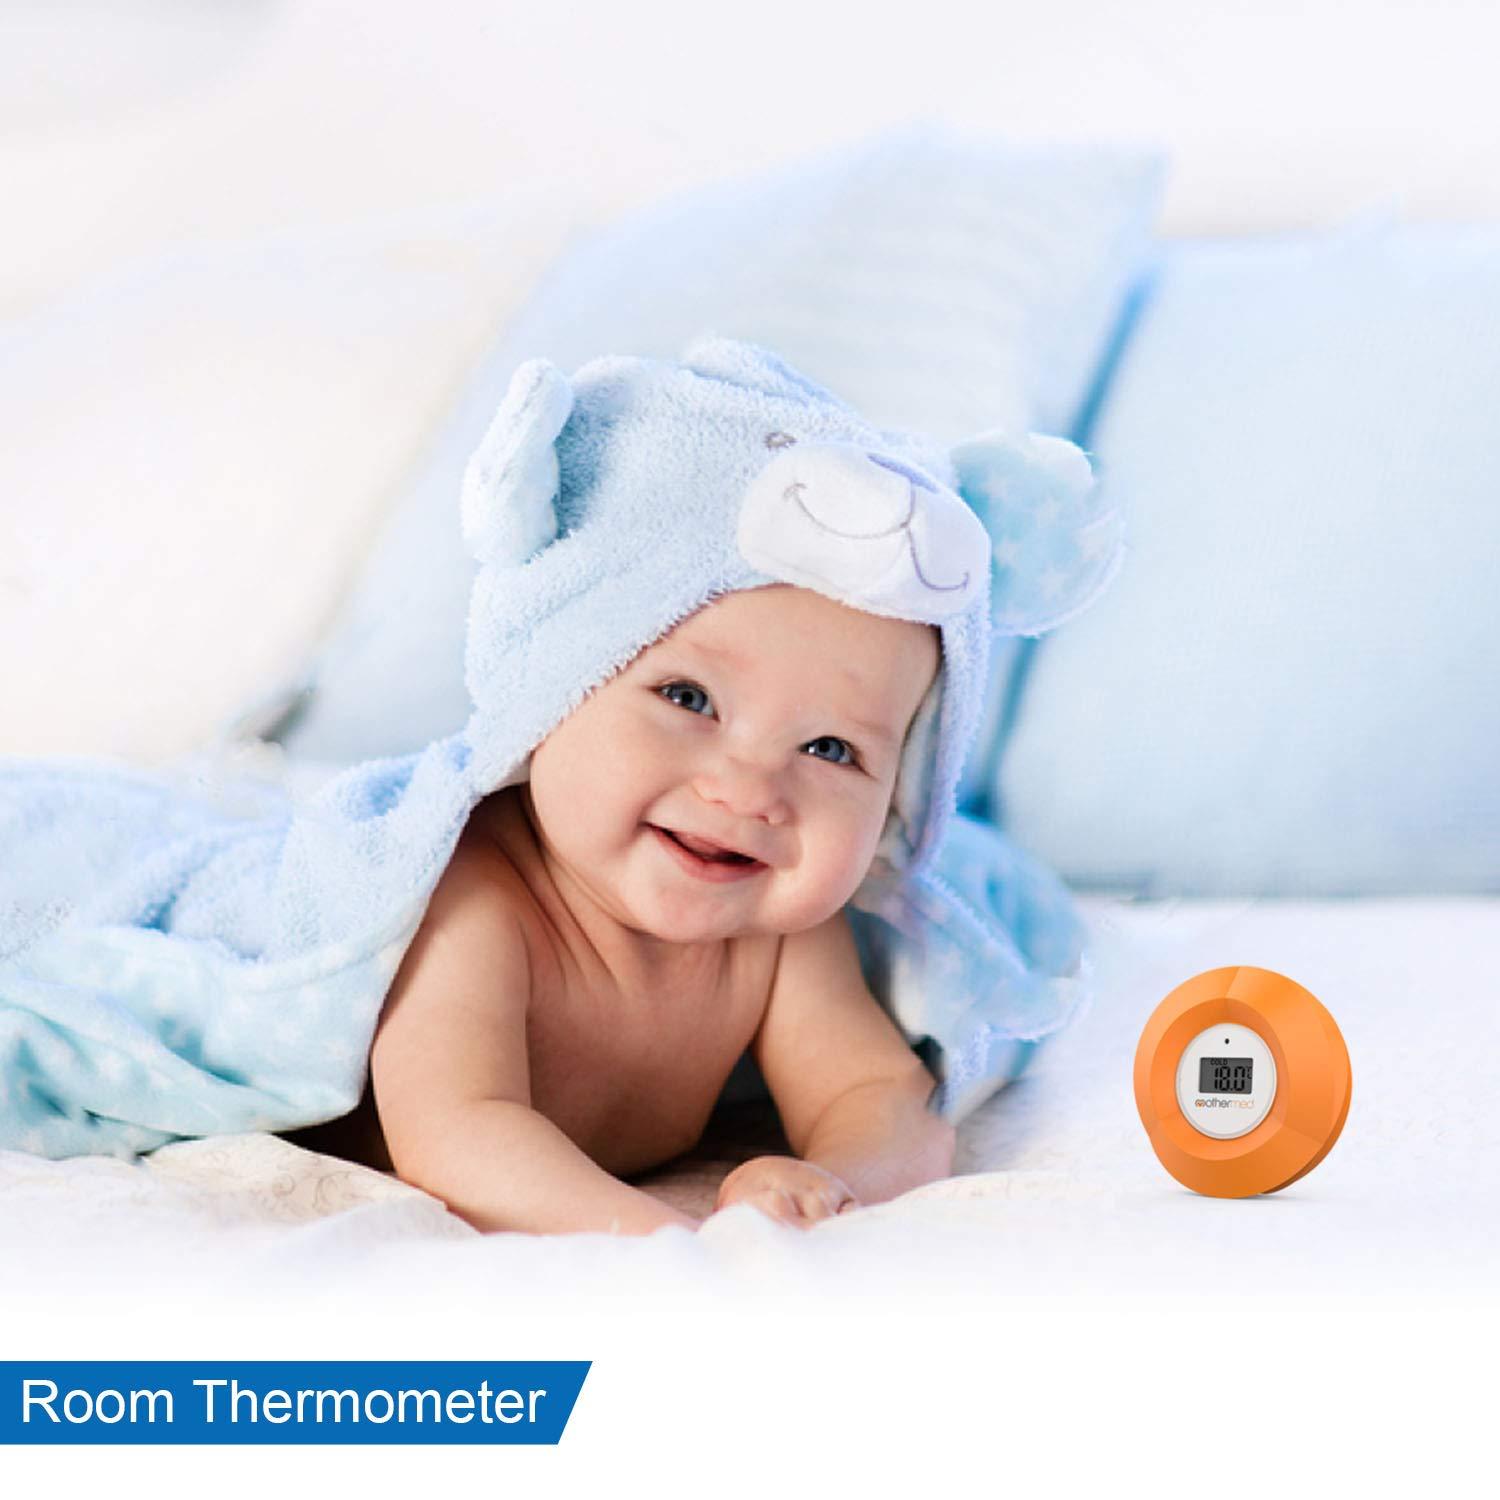 mothermed Baby Bath Thermometer and Floating Bath Toy Bathtub